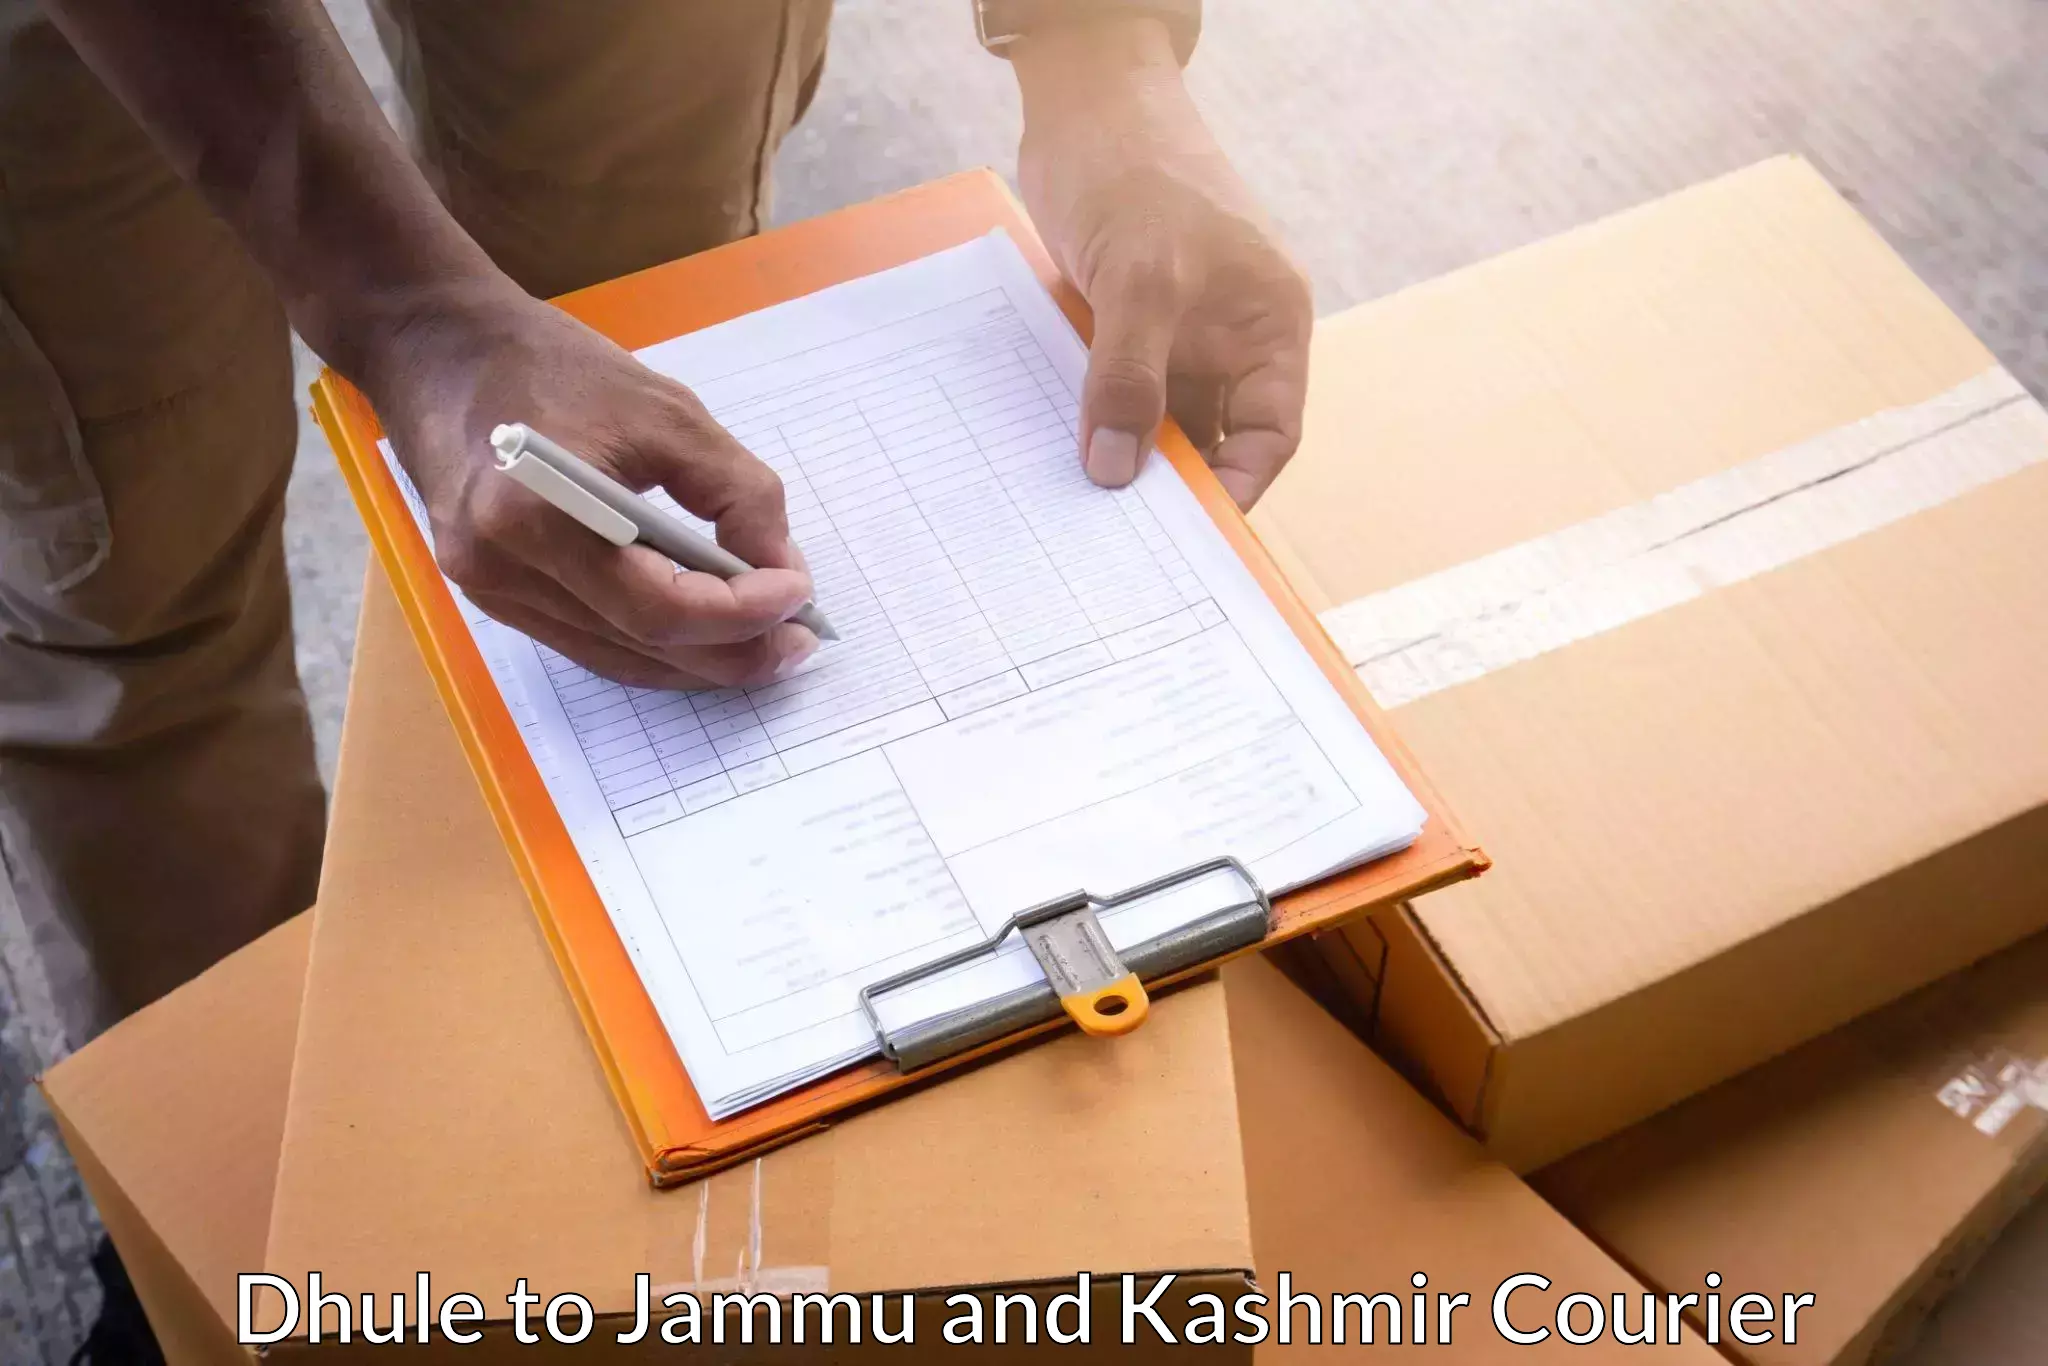 Courier service partnerships Dhule to Pulwama